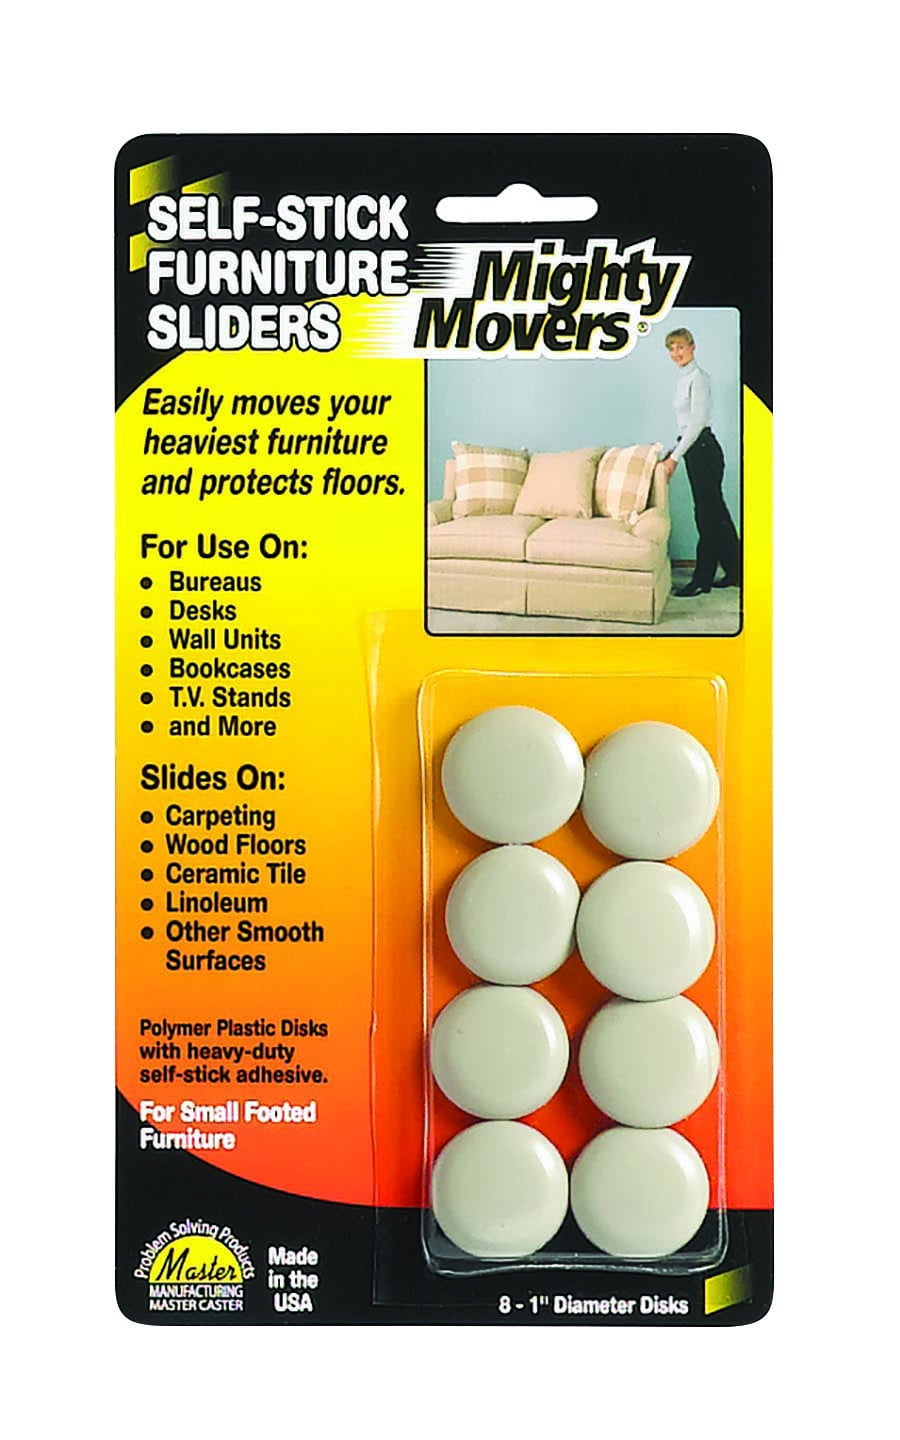 16 pcs Furniture Gliders and Sliders for Carpet 2 Inch Furniture Movers Sliders Heavy Moving Pads for Moving Furniture Movers Carpet Gliders Glides Self-Adhesive Furniture Moving Pads 